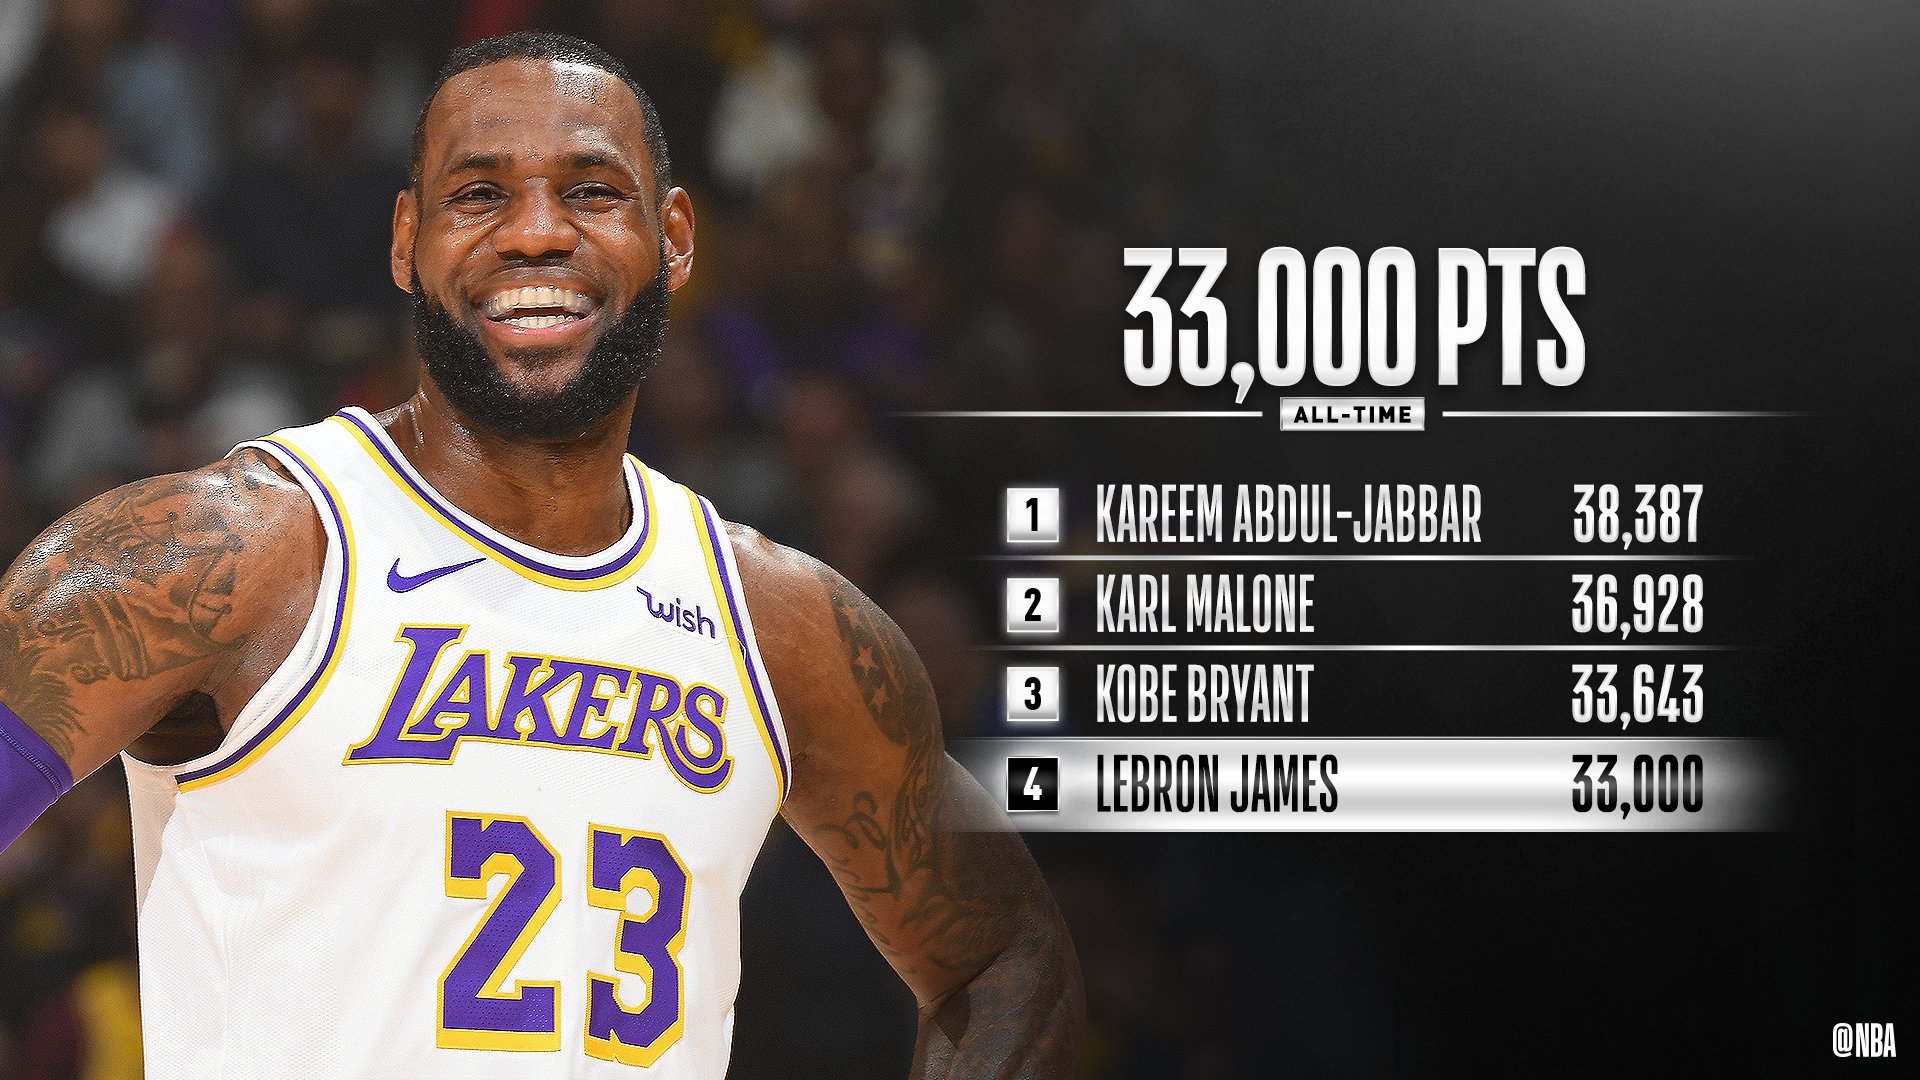 LeBron James Becomes 4th Player Ever to Score 33,000 Points